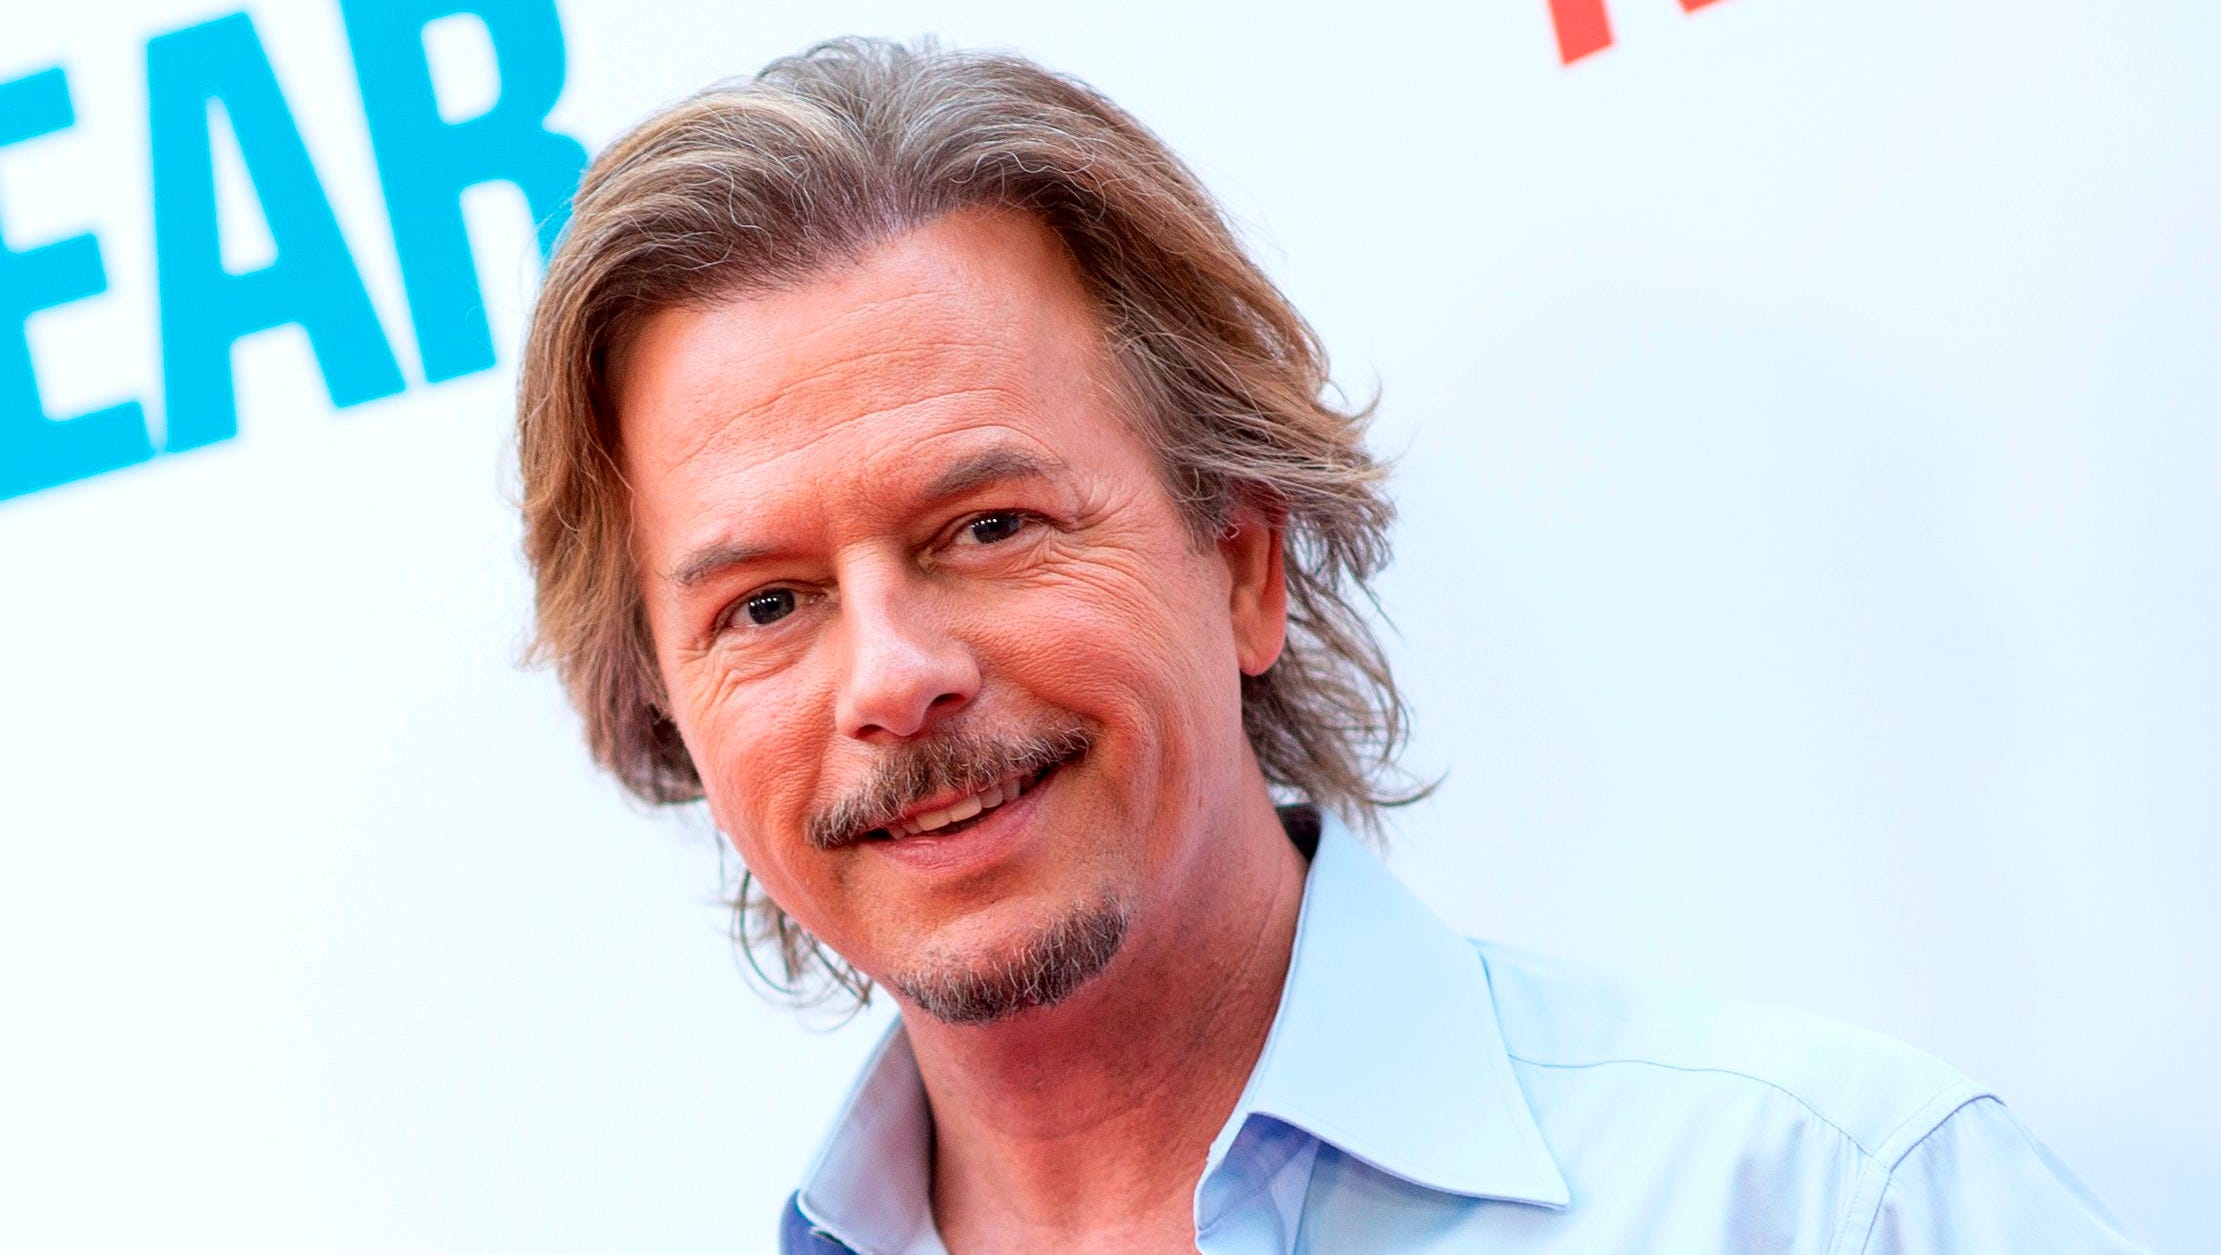 David Spade: Family 'pulling it together' after Kate Spade's death